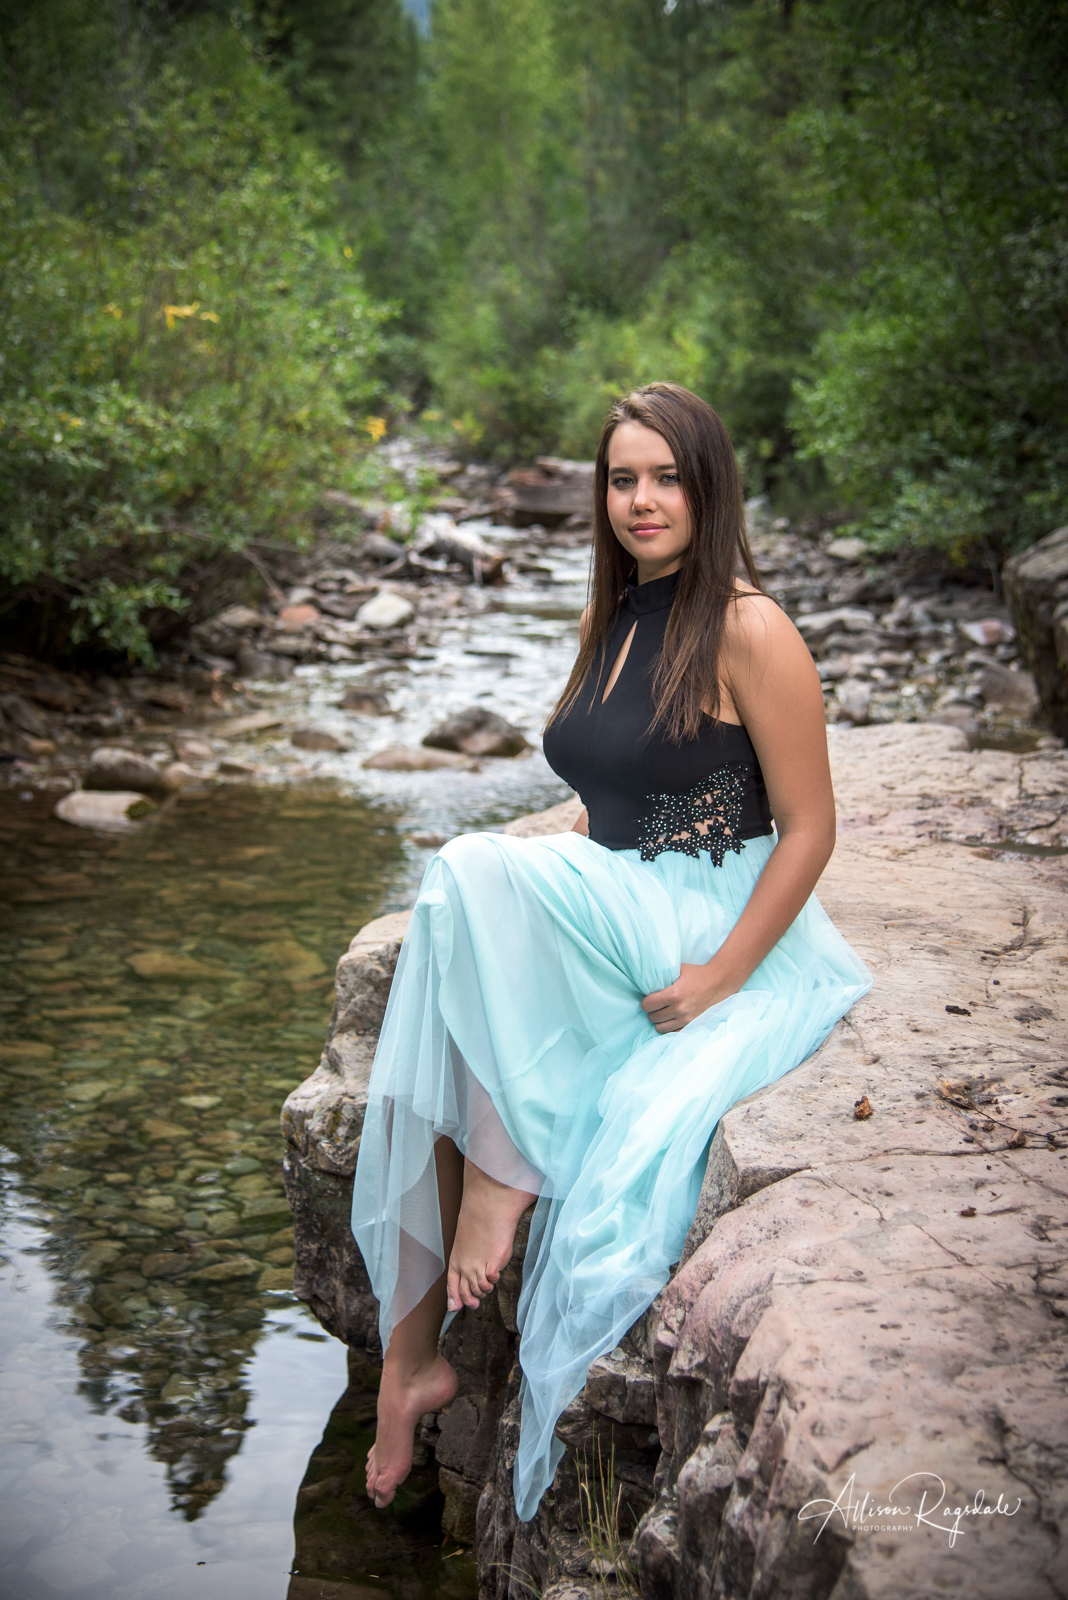 professional outdoor senior pictures in Durango Colorado by Allison Ragsdale Photography